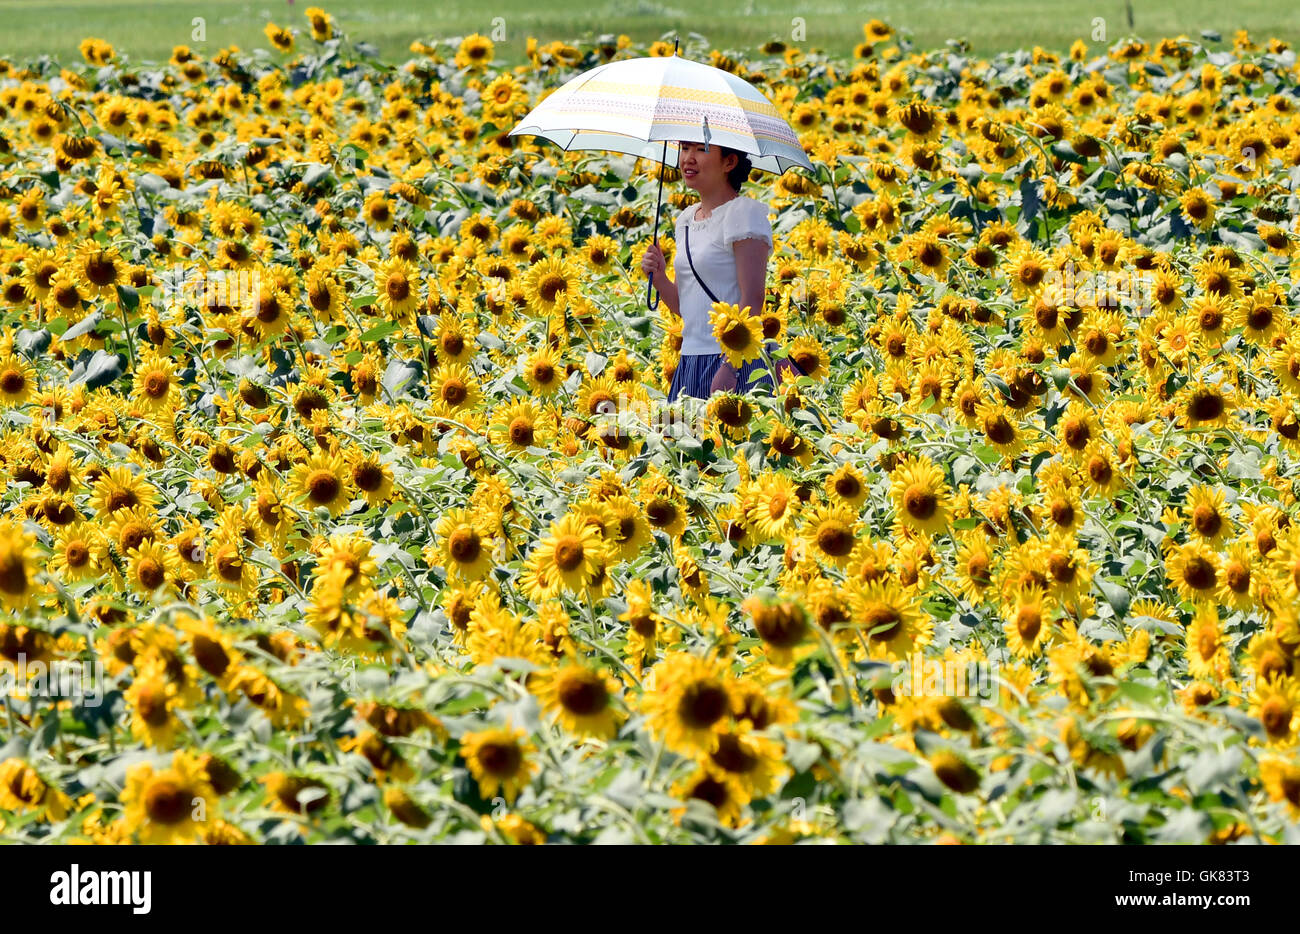 Mashiko, Japan. 19th Aug, 2016. Sunflowers shine brightly in the sweltering summer sun in Mashiko, a rural community known for Mashiko pottery, on Friday, August 19, 2016. Some two million sunflowers of 20 different kinds planted in a 30-acre fallow field are expected to draw hundreds of visitors to an annual sunflower festival starting from August 20 in the town about 57 miles northeast of Tokyo. Credit:  Natsuki Sakai/AFLO/Alamy Live News Stock Photo